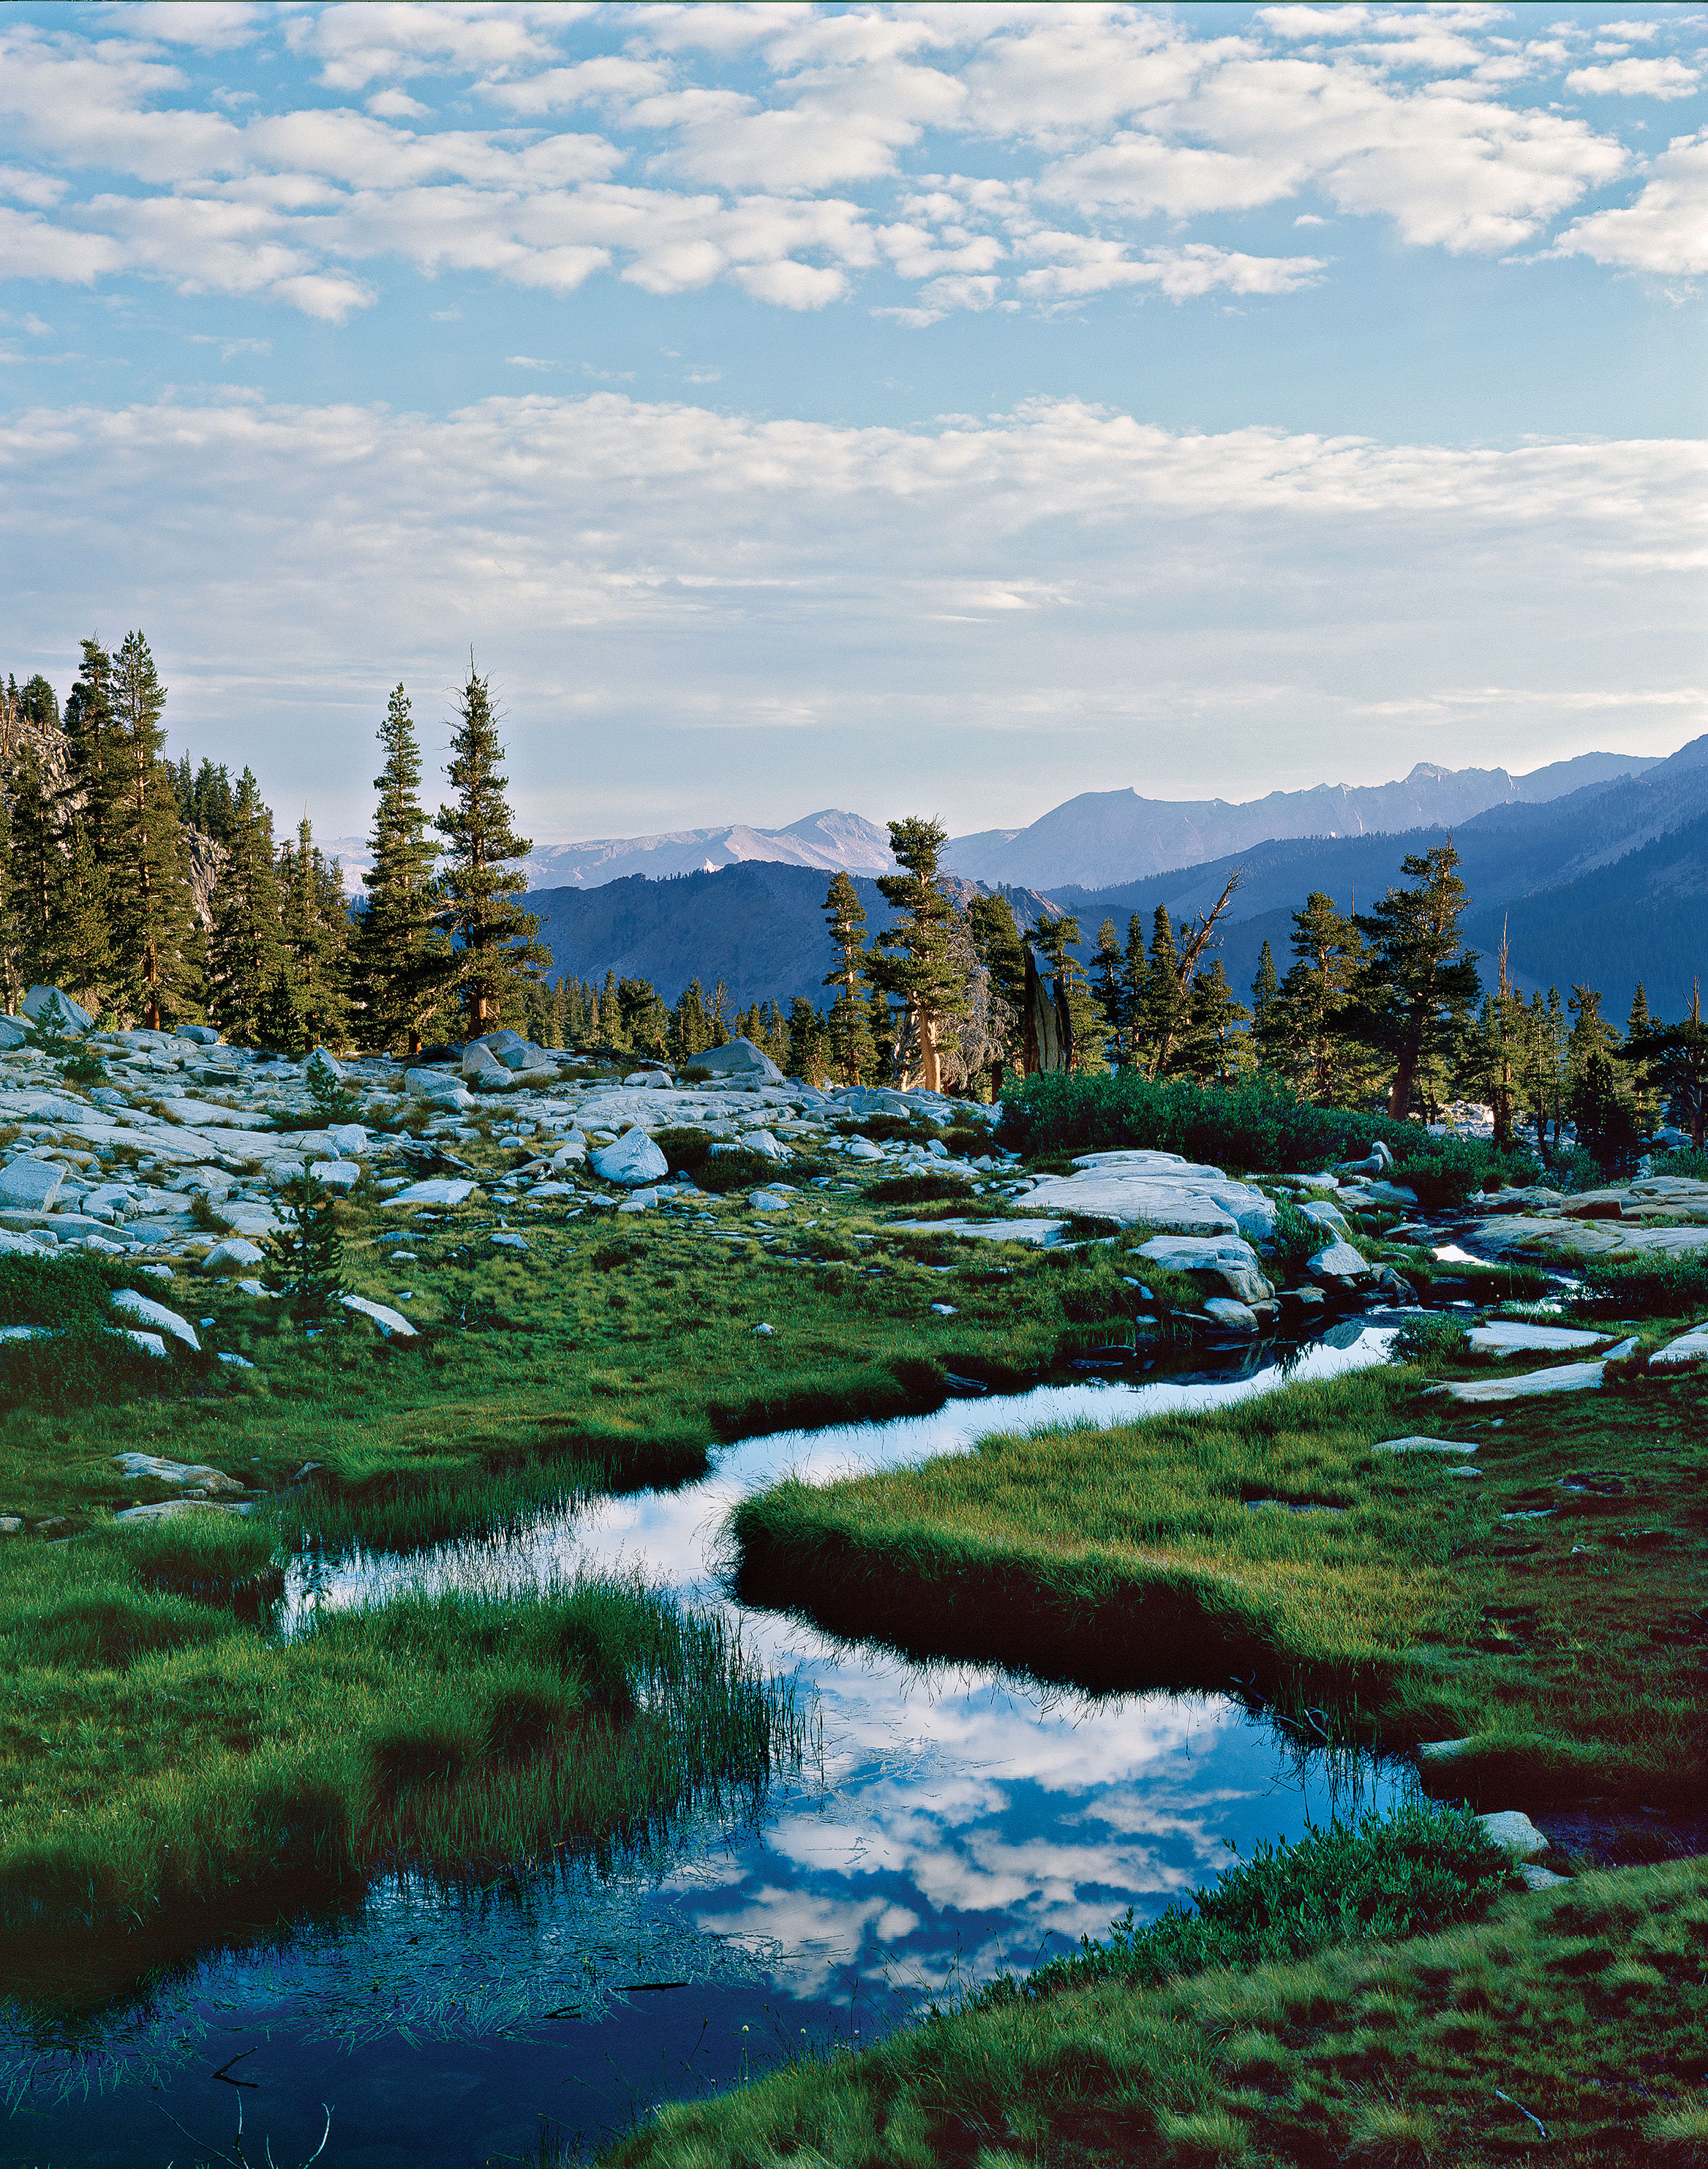 Sequoia and Kings Canyon National Parks Guide